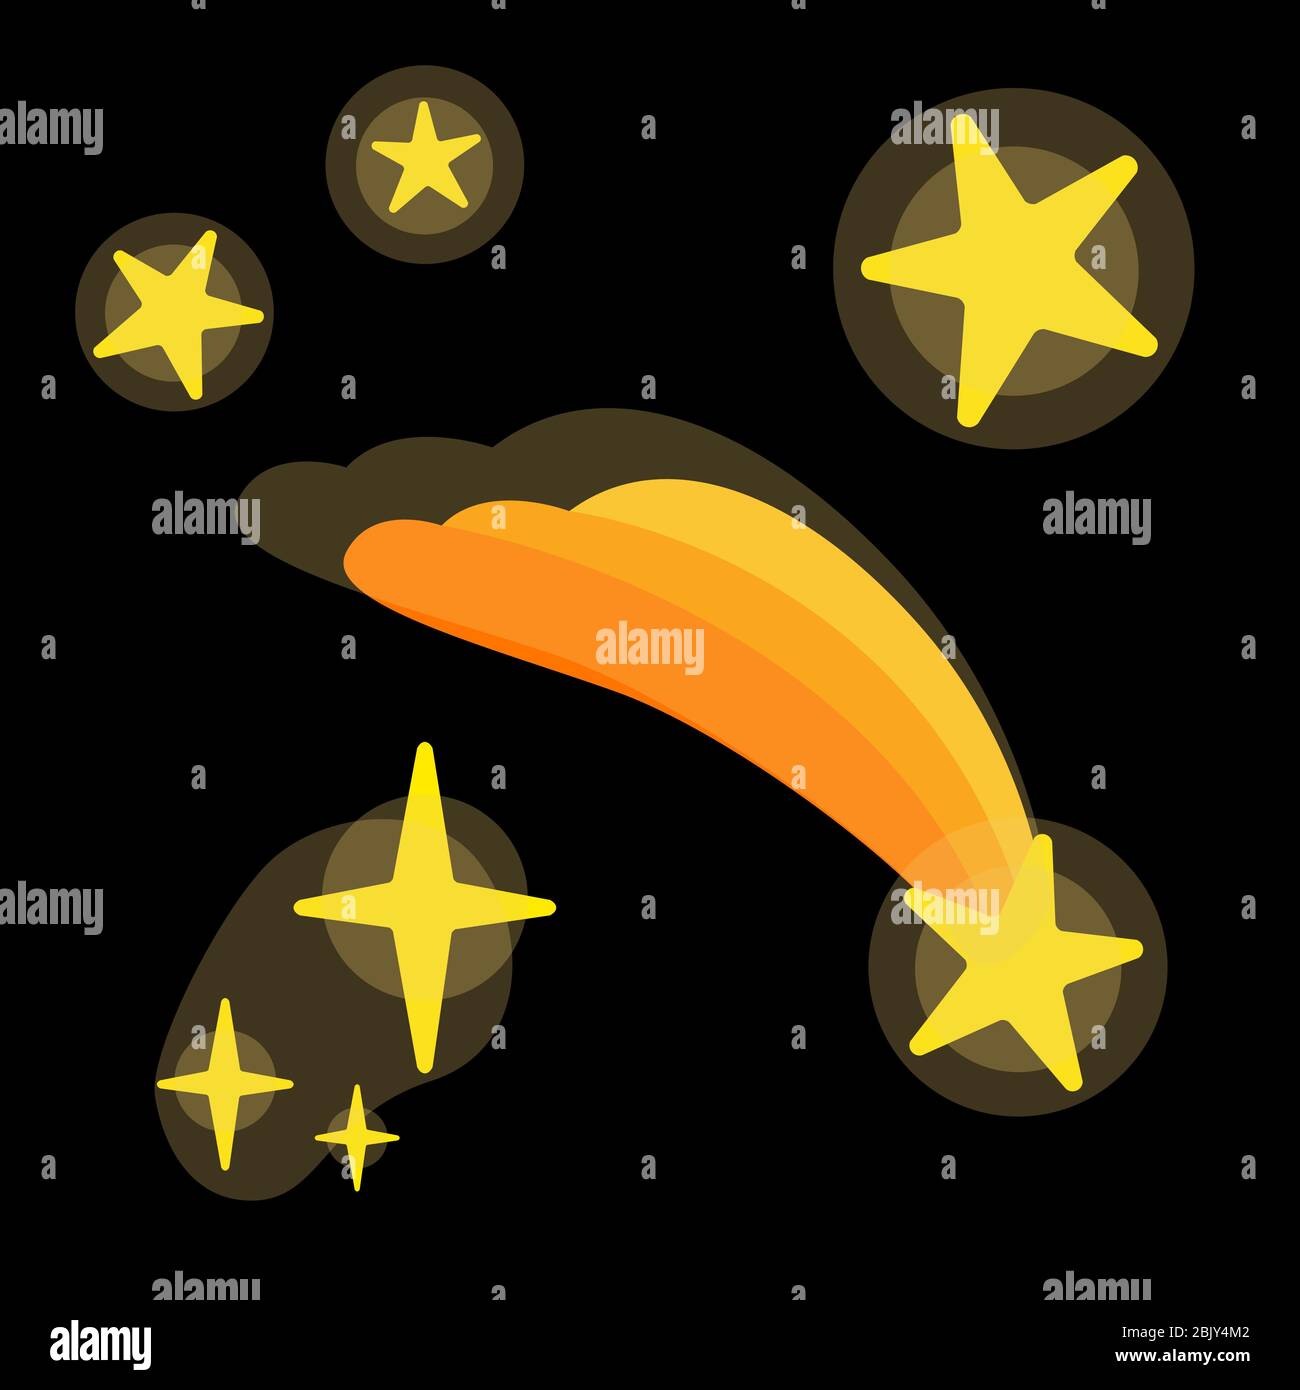 Decorative stars set Flat icon isolated on black background. Doodle meteor in night sky element. Falling star Cartoon vector illustration. Simple Yellow sticker clip art for graphic design. Stock Vector